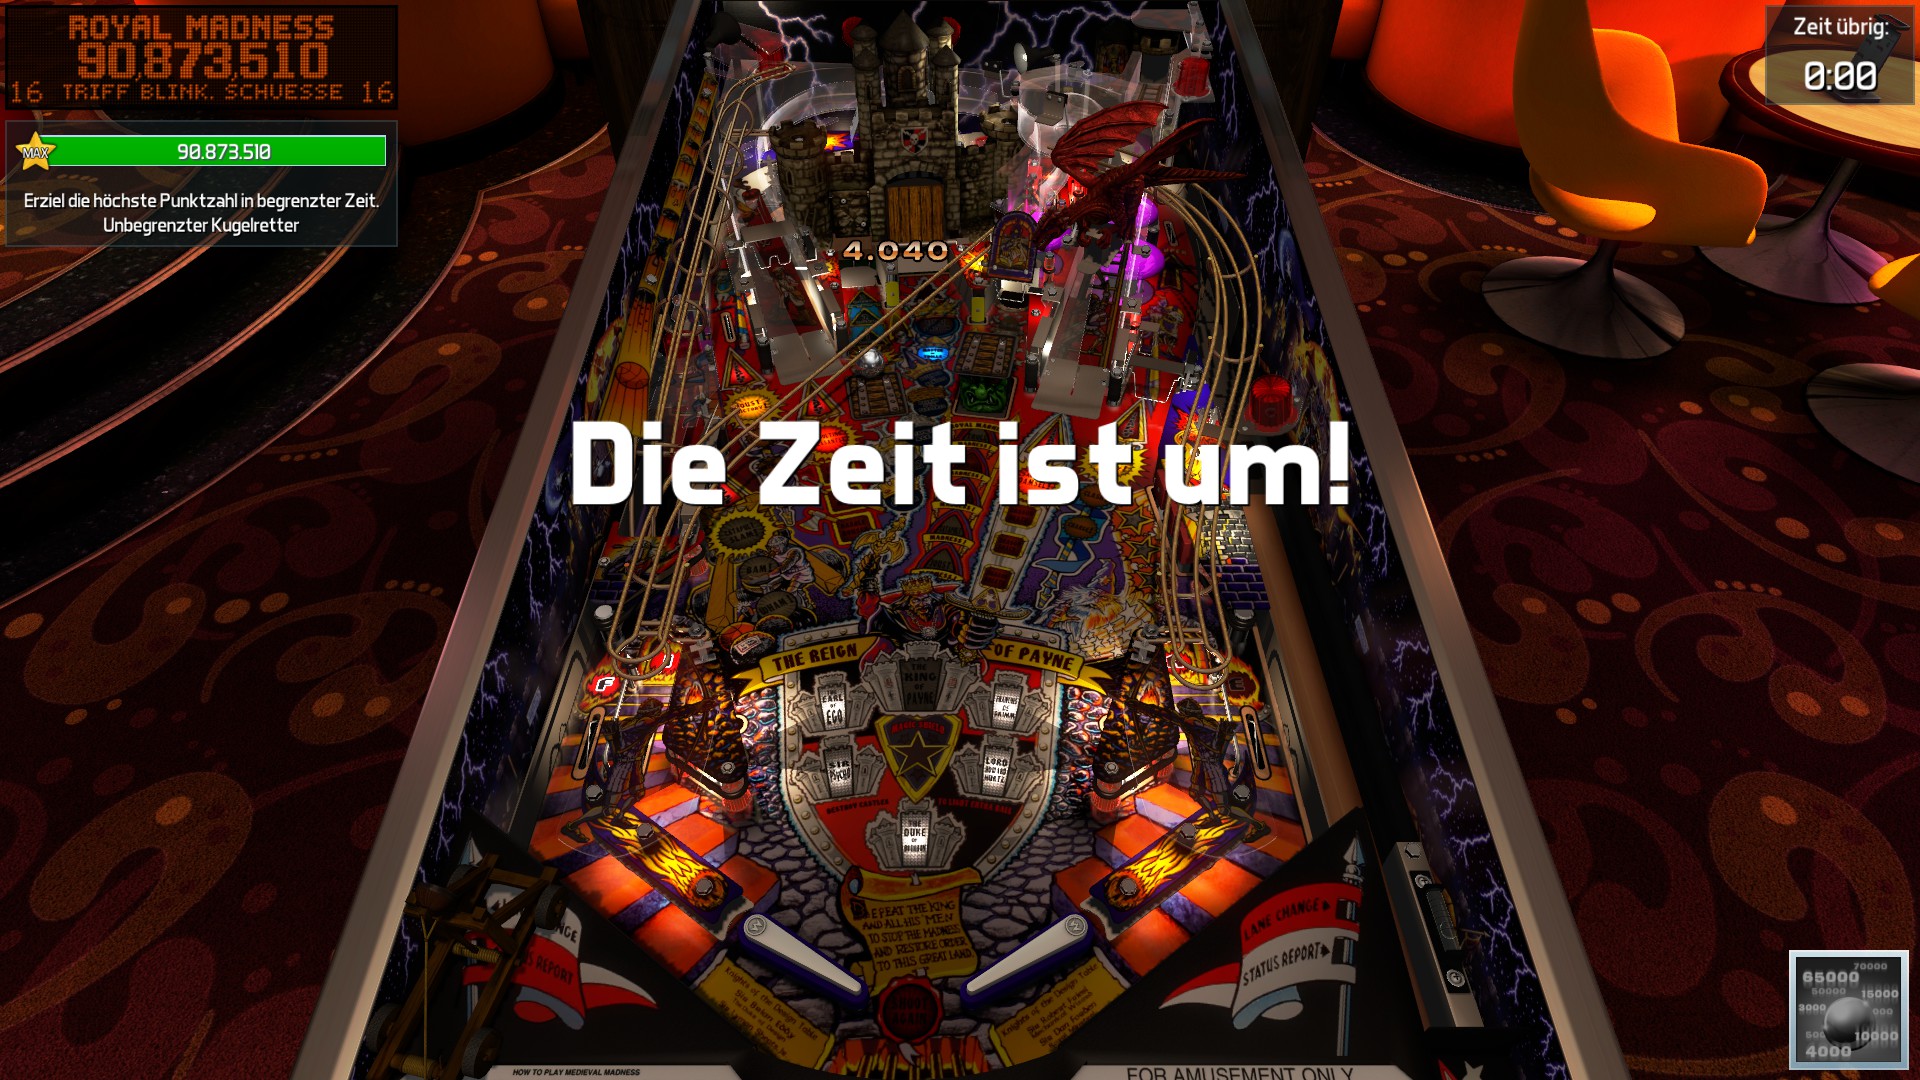 e2e4: Pinball FX3: Medieval Madness [5 Minute] (PC) 90,873,510 points on 2022-06-20 12:35:49